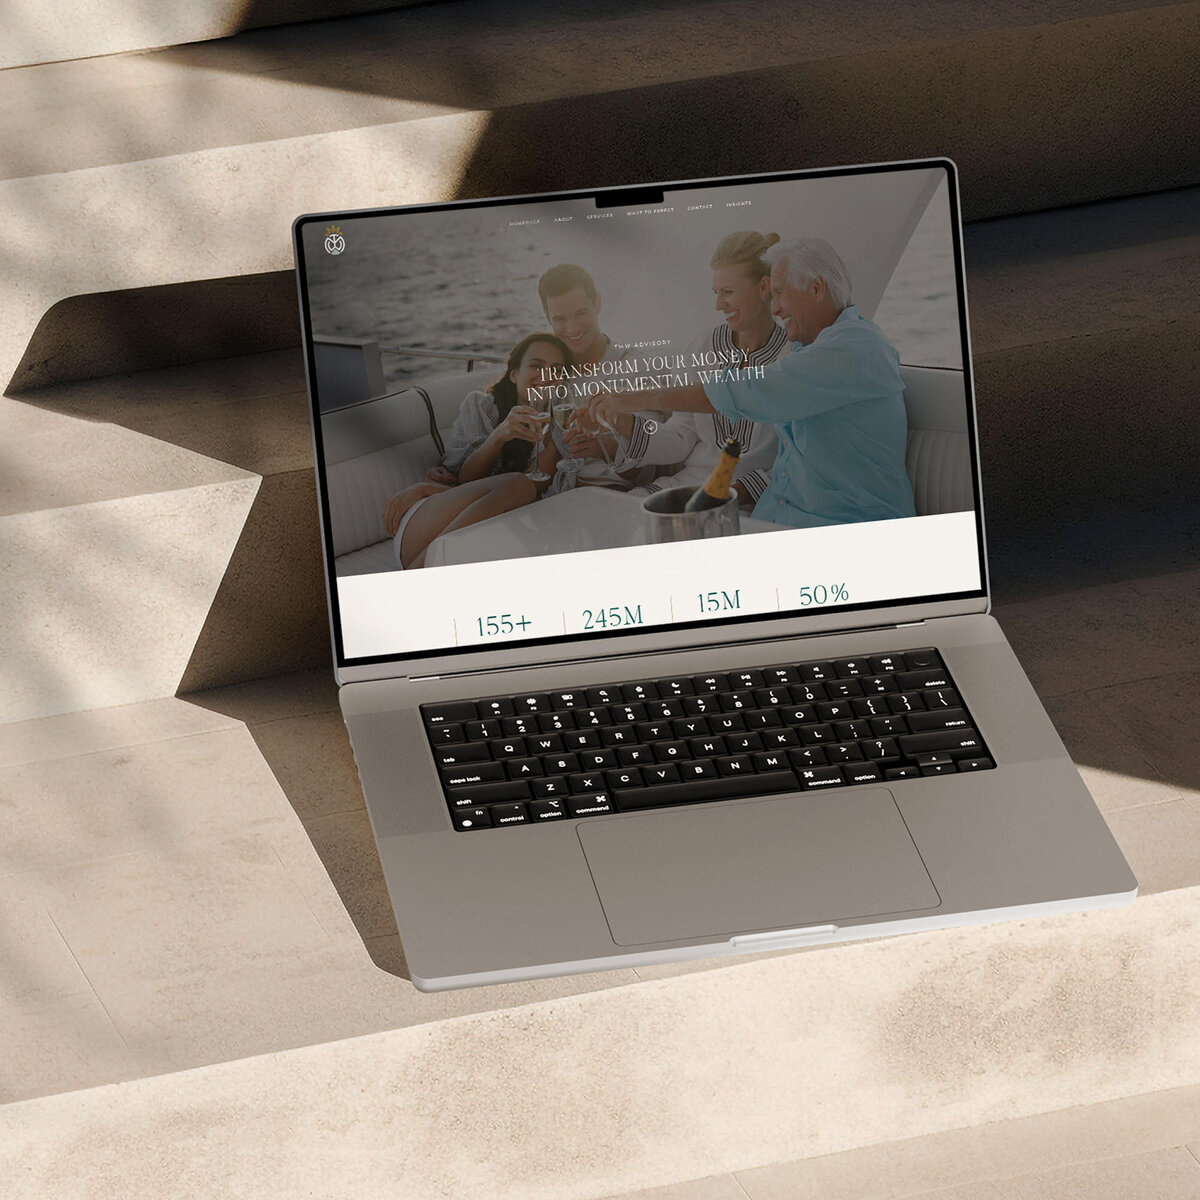 The Agency's bespoke web design for TMW Advisory redefines the wealth management experience online, showcasing their financial expertise and client-centric approach.